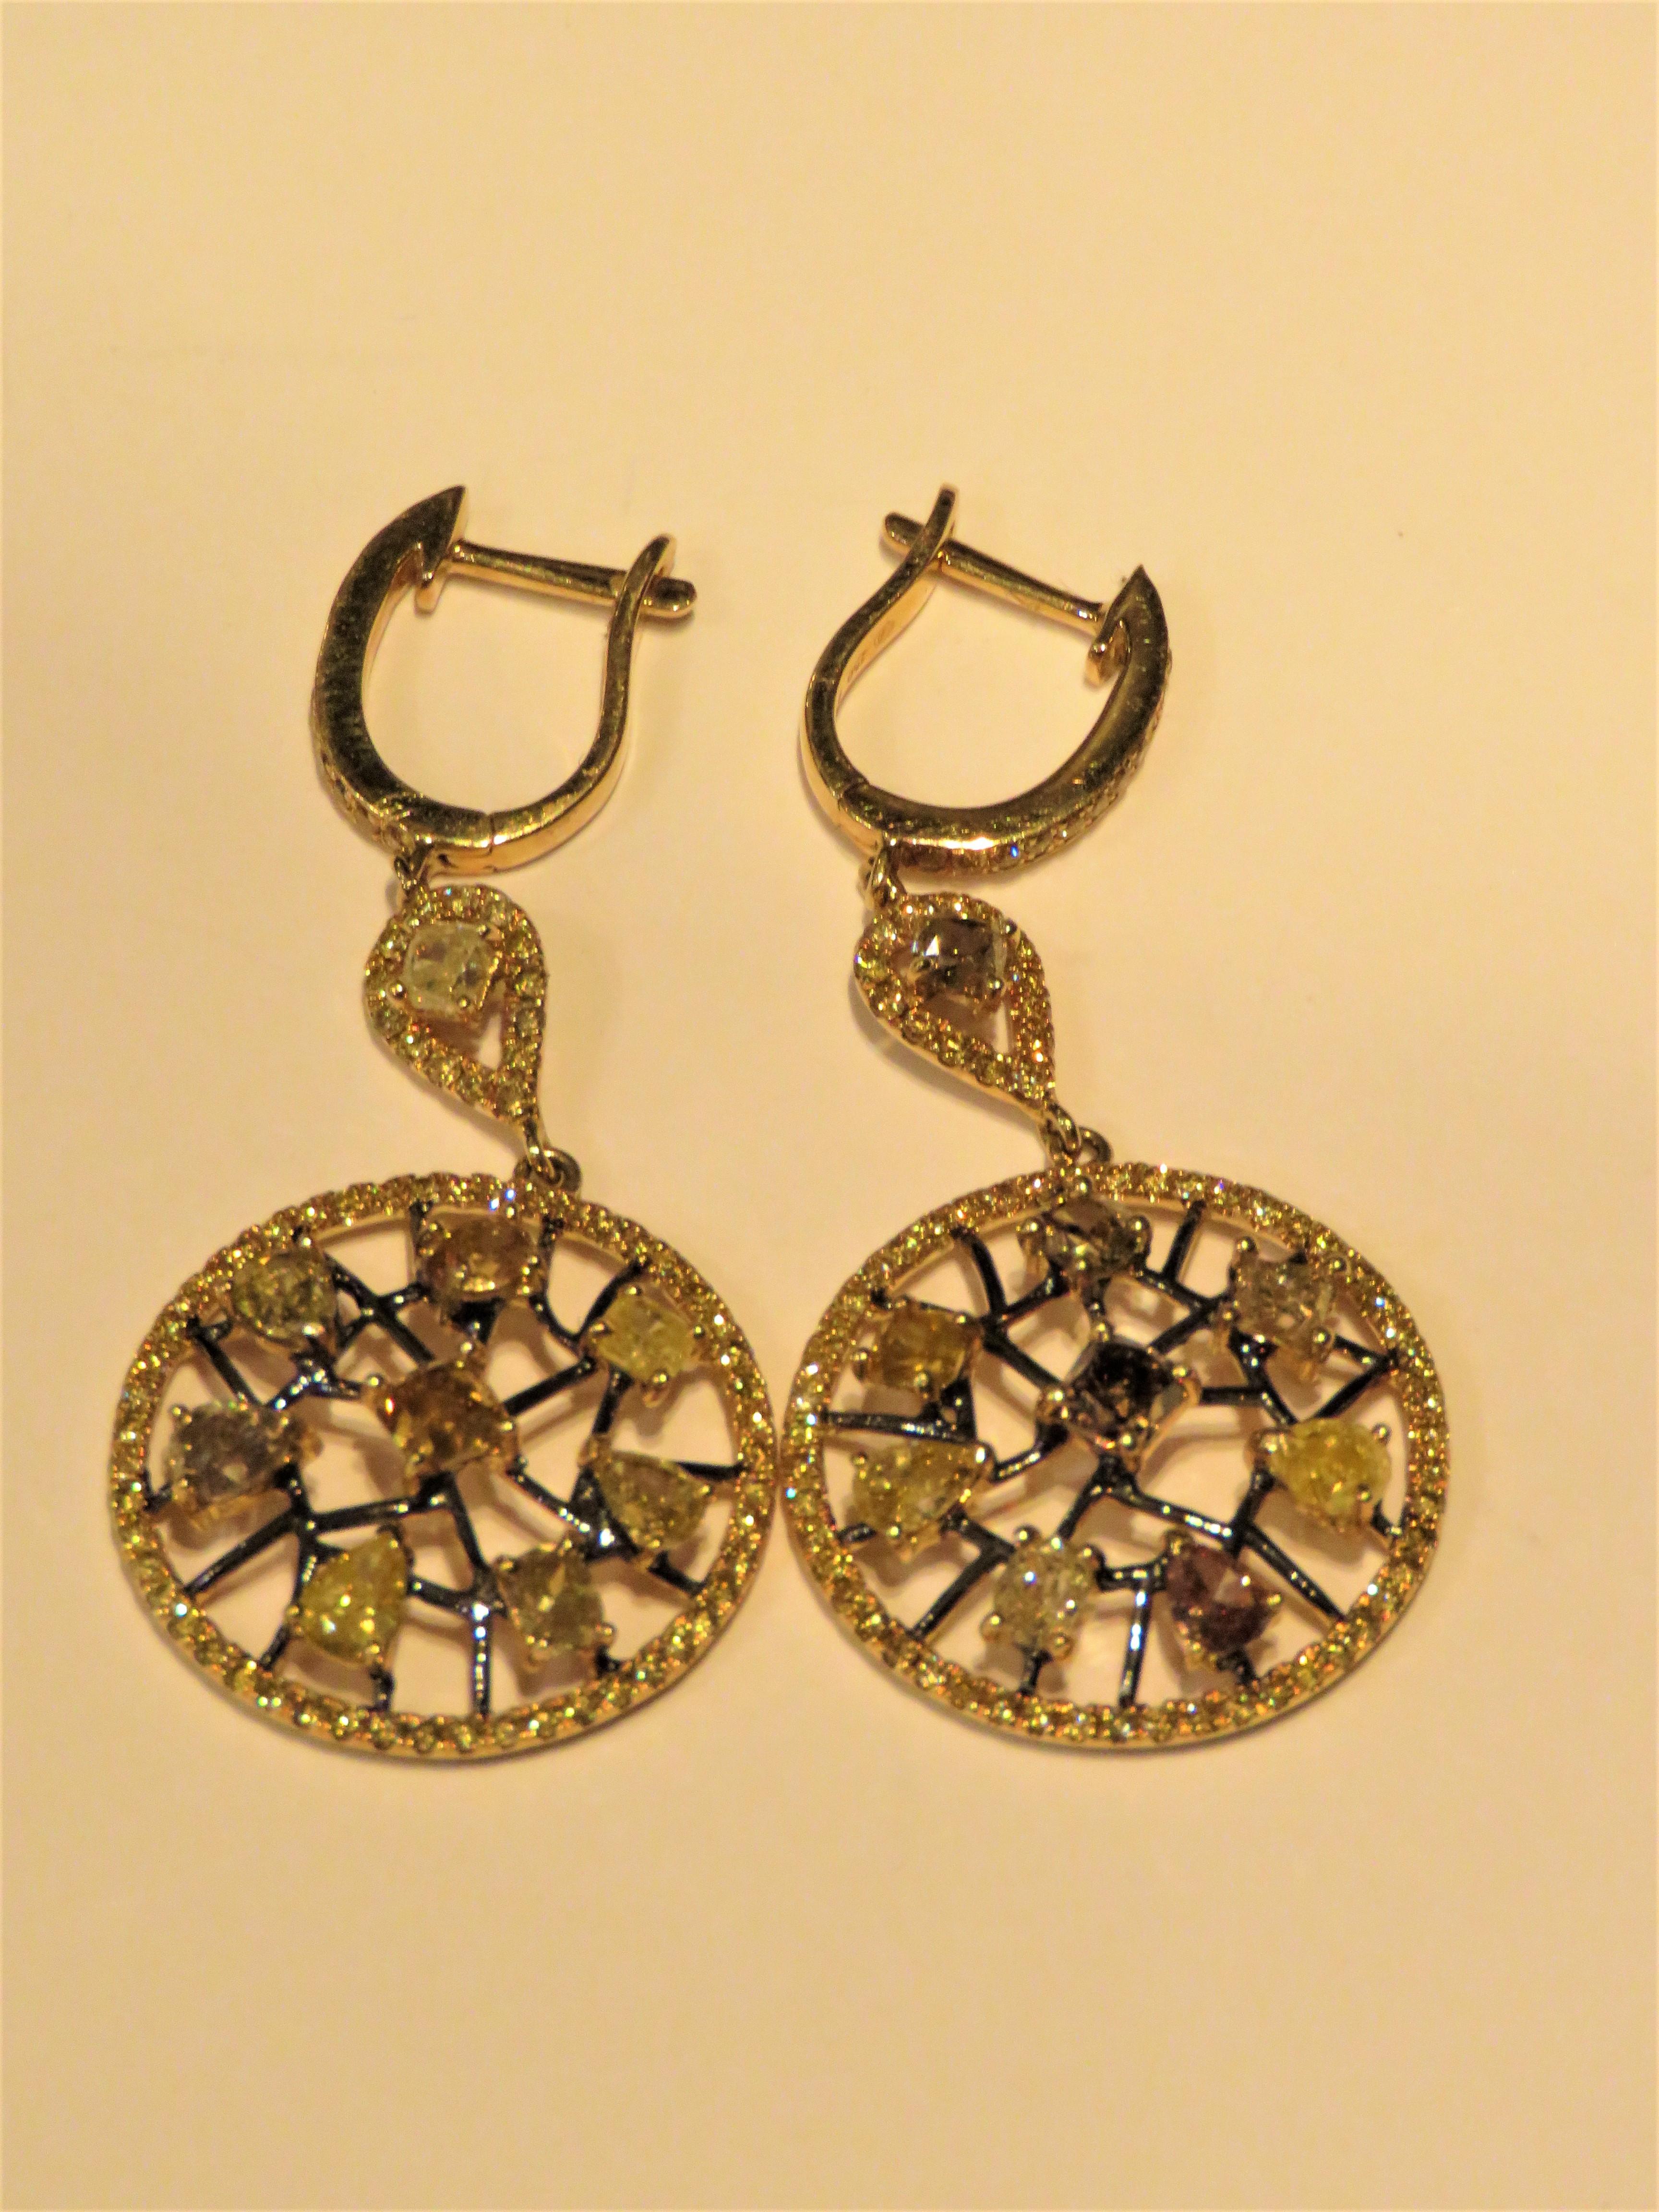 The Following Item we are offering are these Rare Beautiful 18KT Gold Yellow, Cognac, and Champagne Diamond Earrings. Earrings are comprised of approx. 4 Carats of Fine Glittering Fancy Colored Diamonds across a Black Gold Web. The Diamonds are of